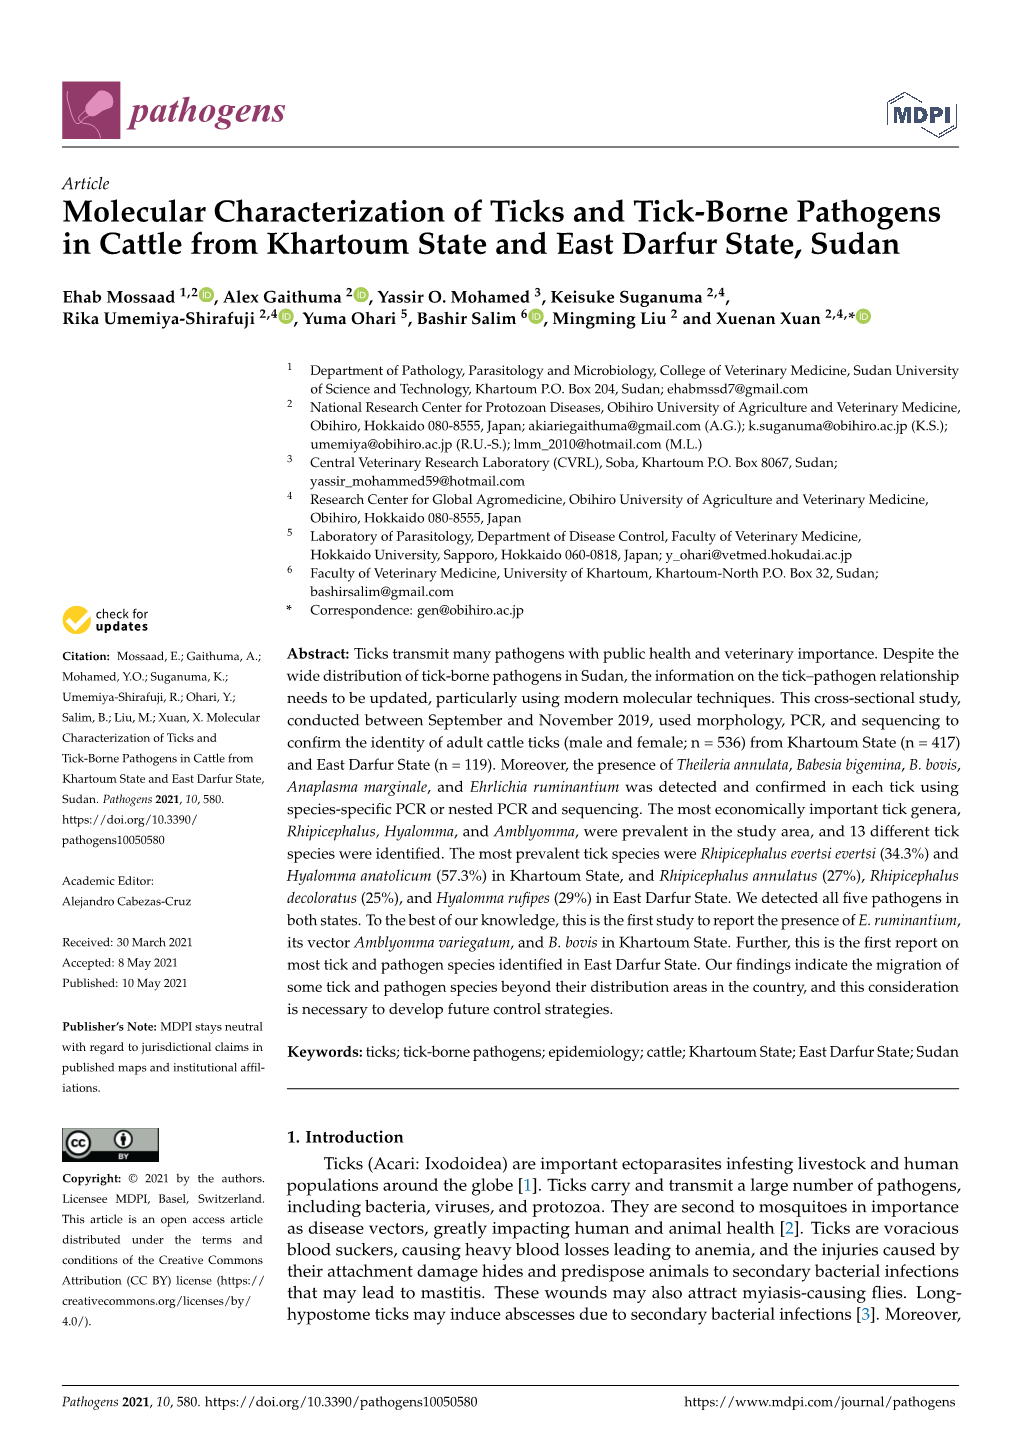 Molecular Characterization of Ticks and Tick-Borne Pathogens in Cattle from Khartoum State and East Darfur State, Sudan